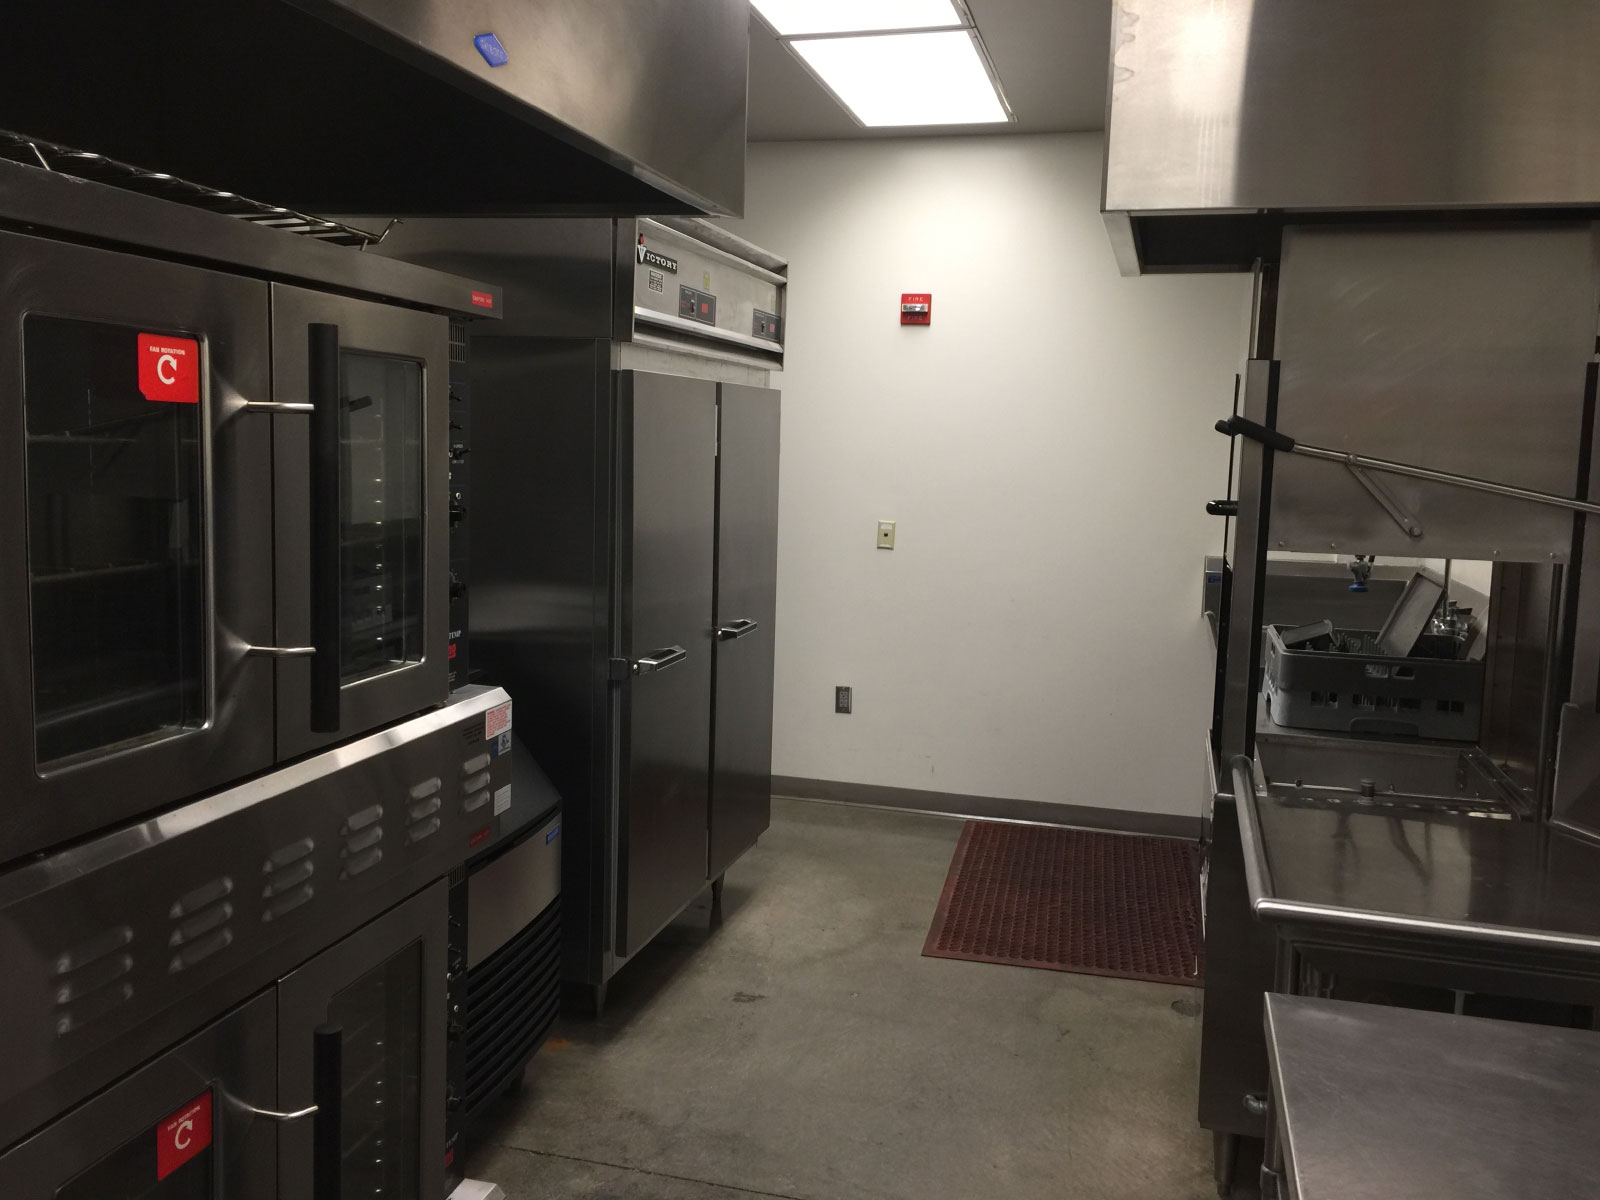 The back area of the Wilsonville campus kitchen area with a refridgerator, dishwasher and heating units